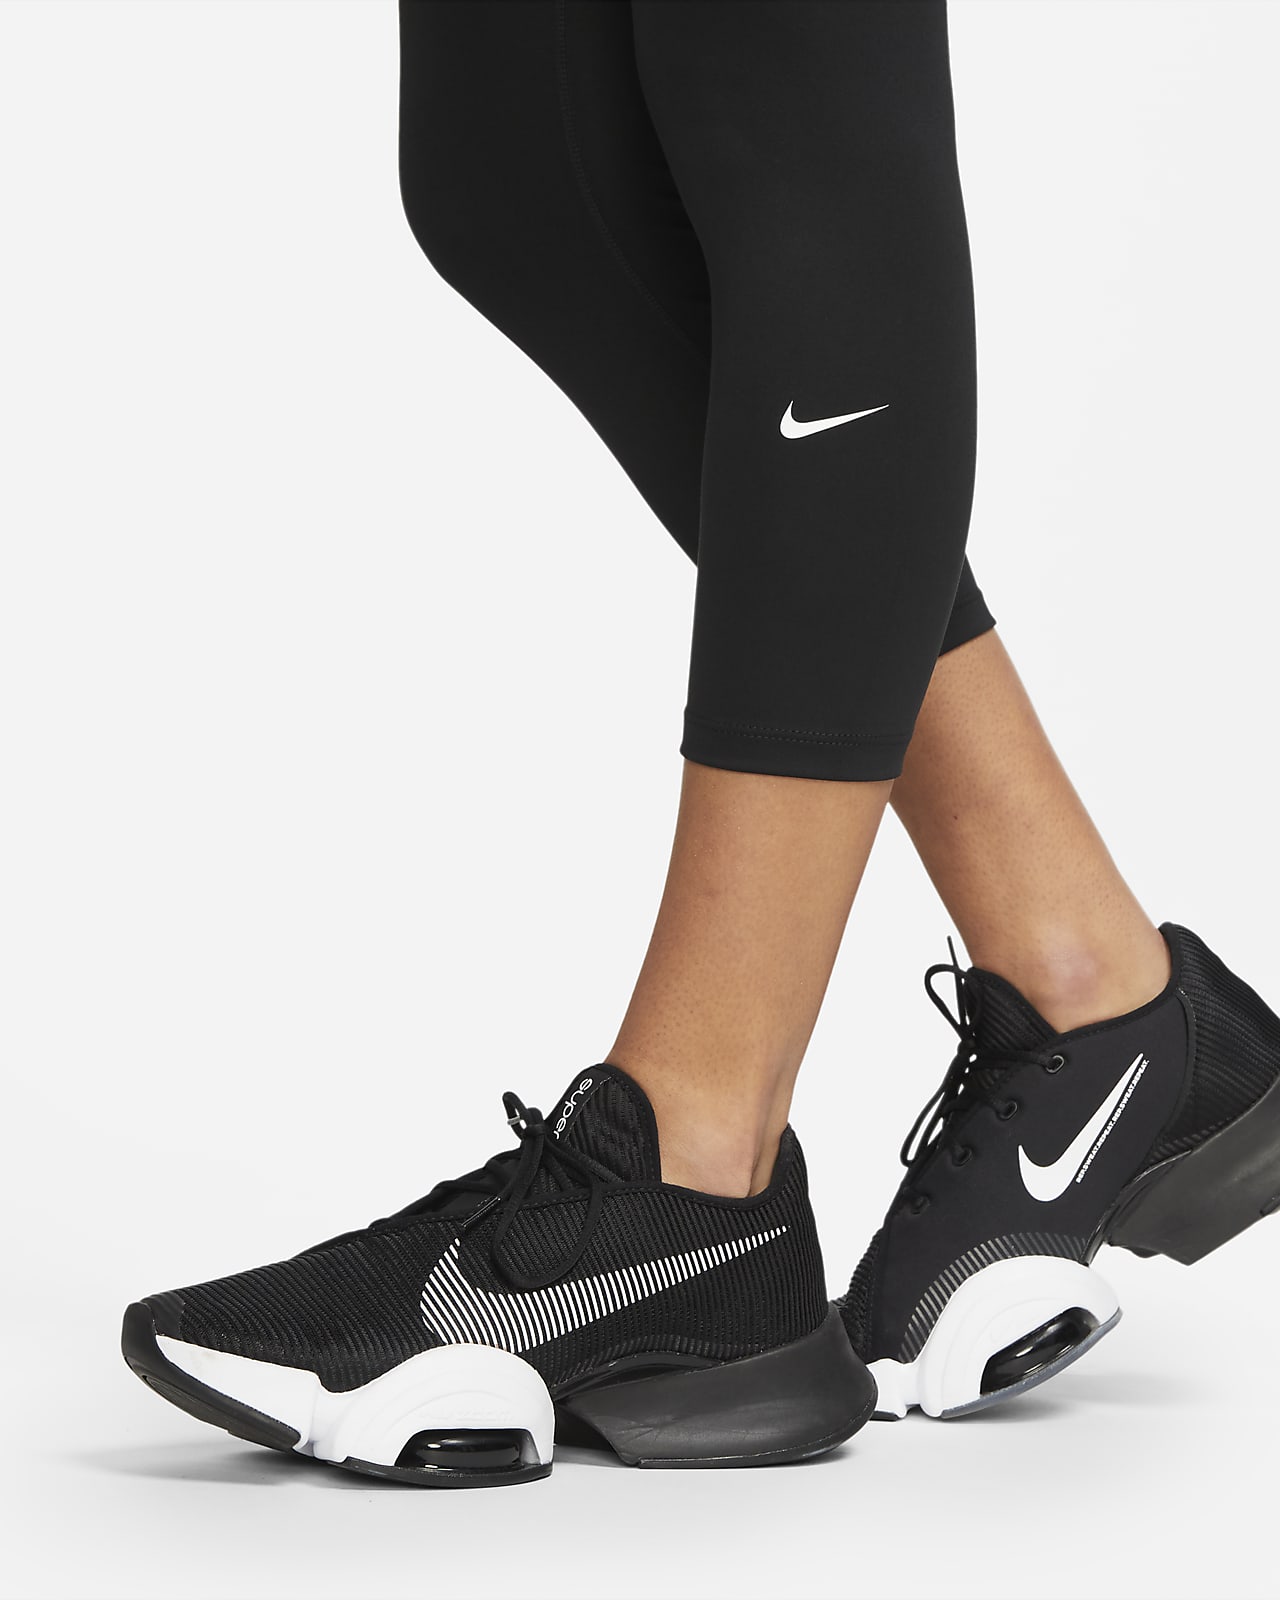 Nike fast women's crop leggings. Brand new with tags. Sizes: Small - 1  stock Medium : 4 stocks Mine: 995 Steal: 1095 Grab: 1195